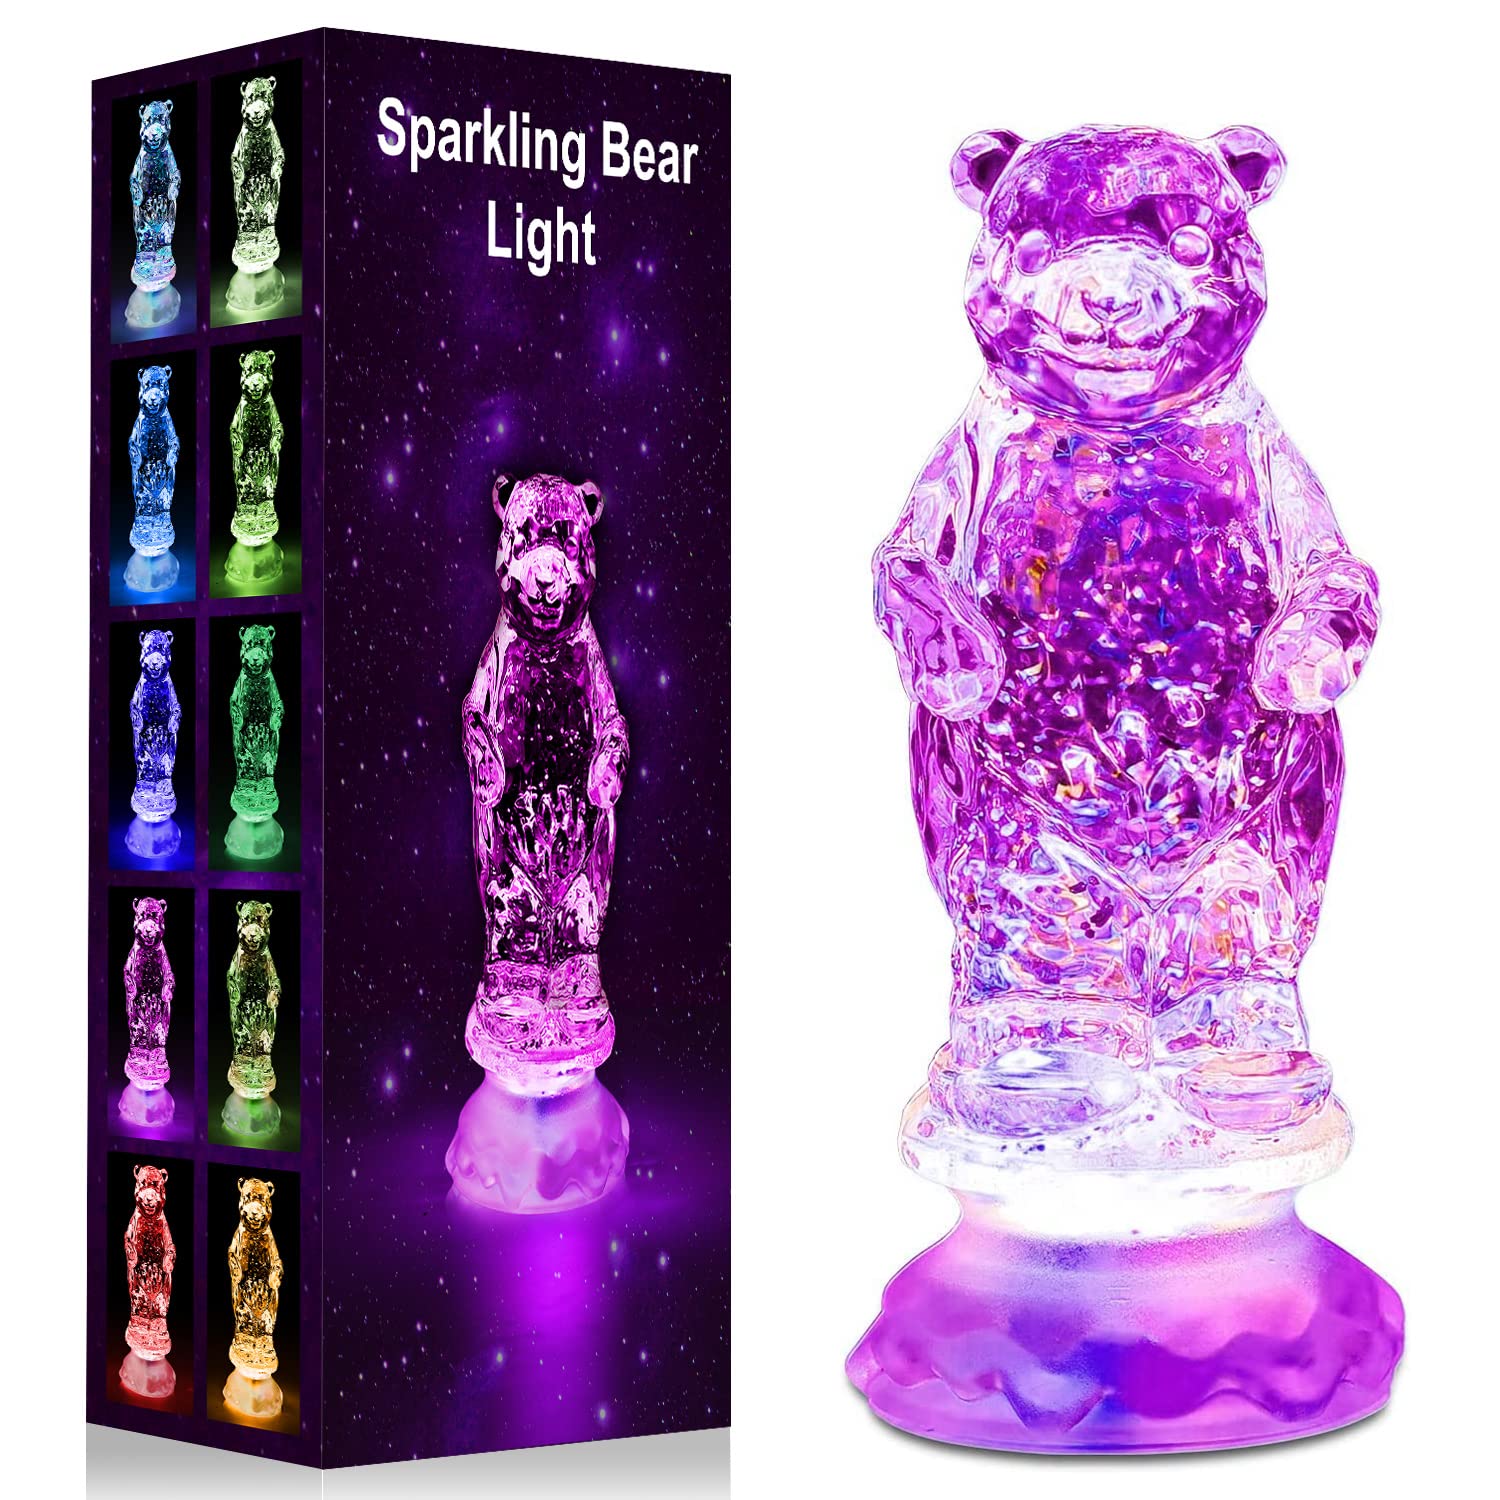 Book Cover Dream Master Color Changing Night Light with Timer,Christmas Gifts for Kids,Daughter,Girls Gifts Sparkling Bear Light for 3-9 Year Old Girls and Boys,Sequin Rotating Galaxy Light for Room Decor,Bear